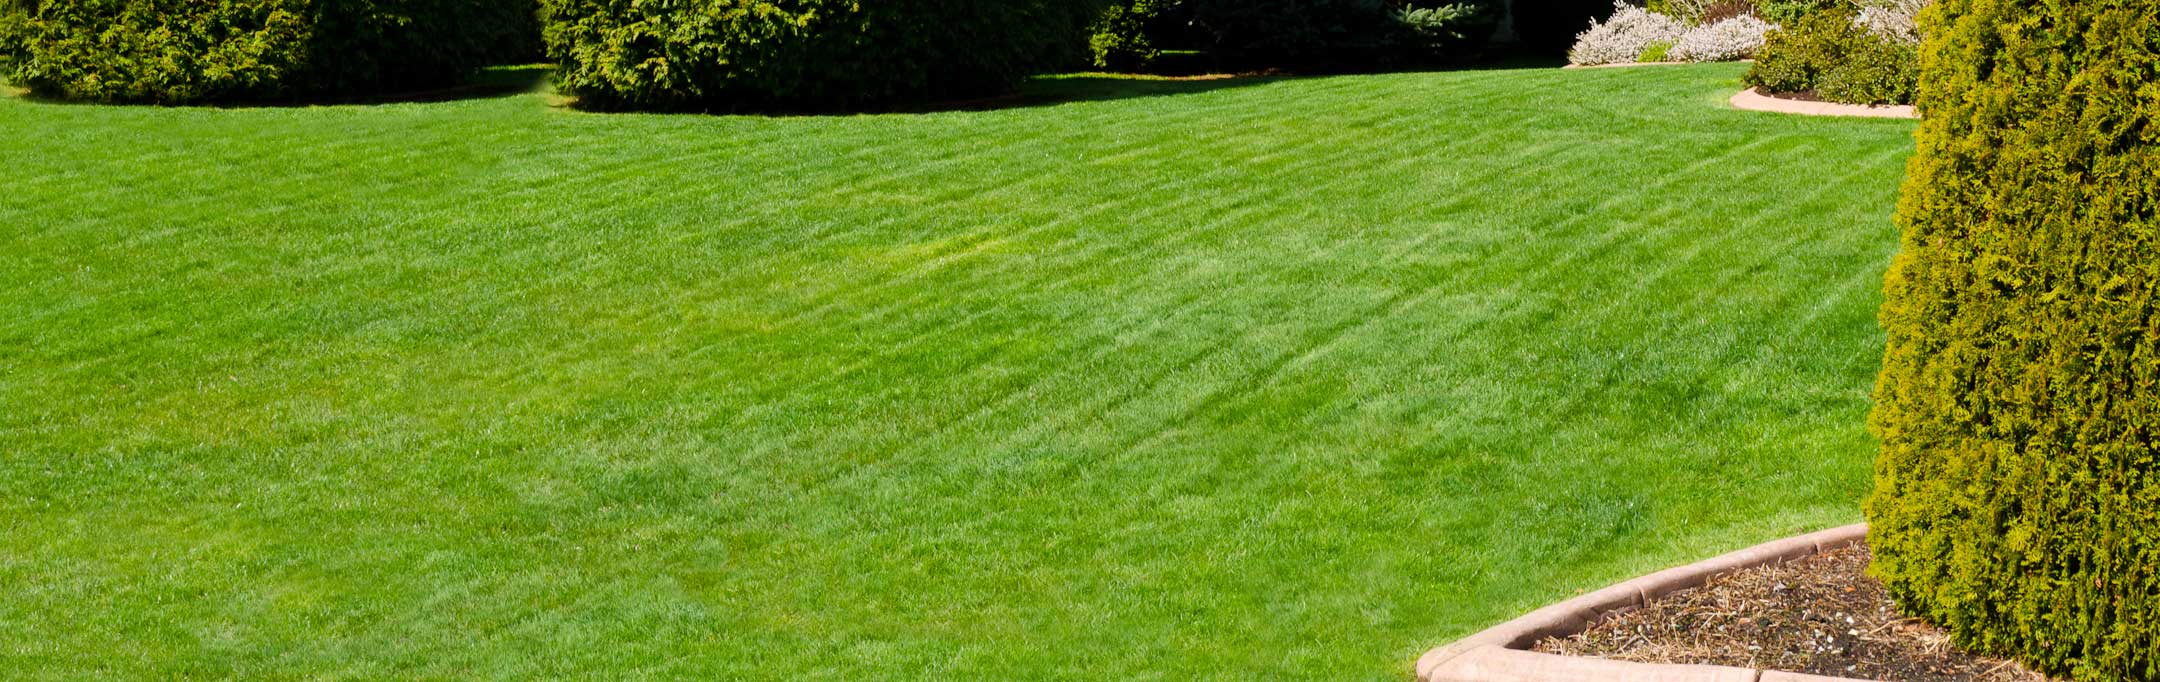 Barefoot Lawn | 208-323-8002 | Landscape Maintenance in Boise, Nampa and Meridian, Idaho